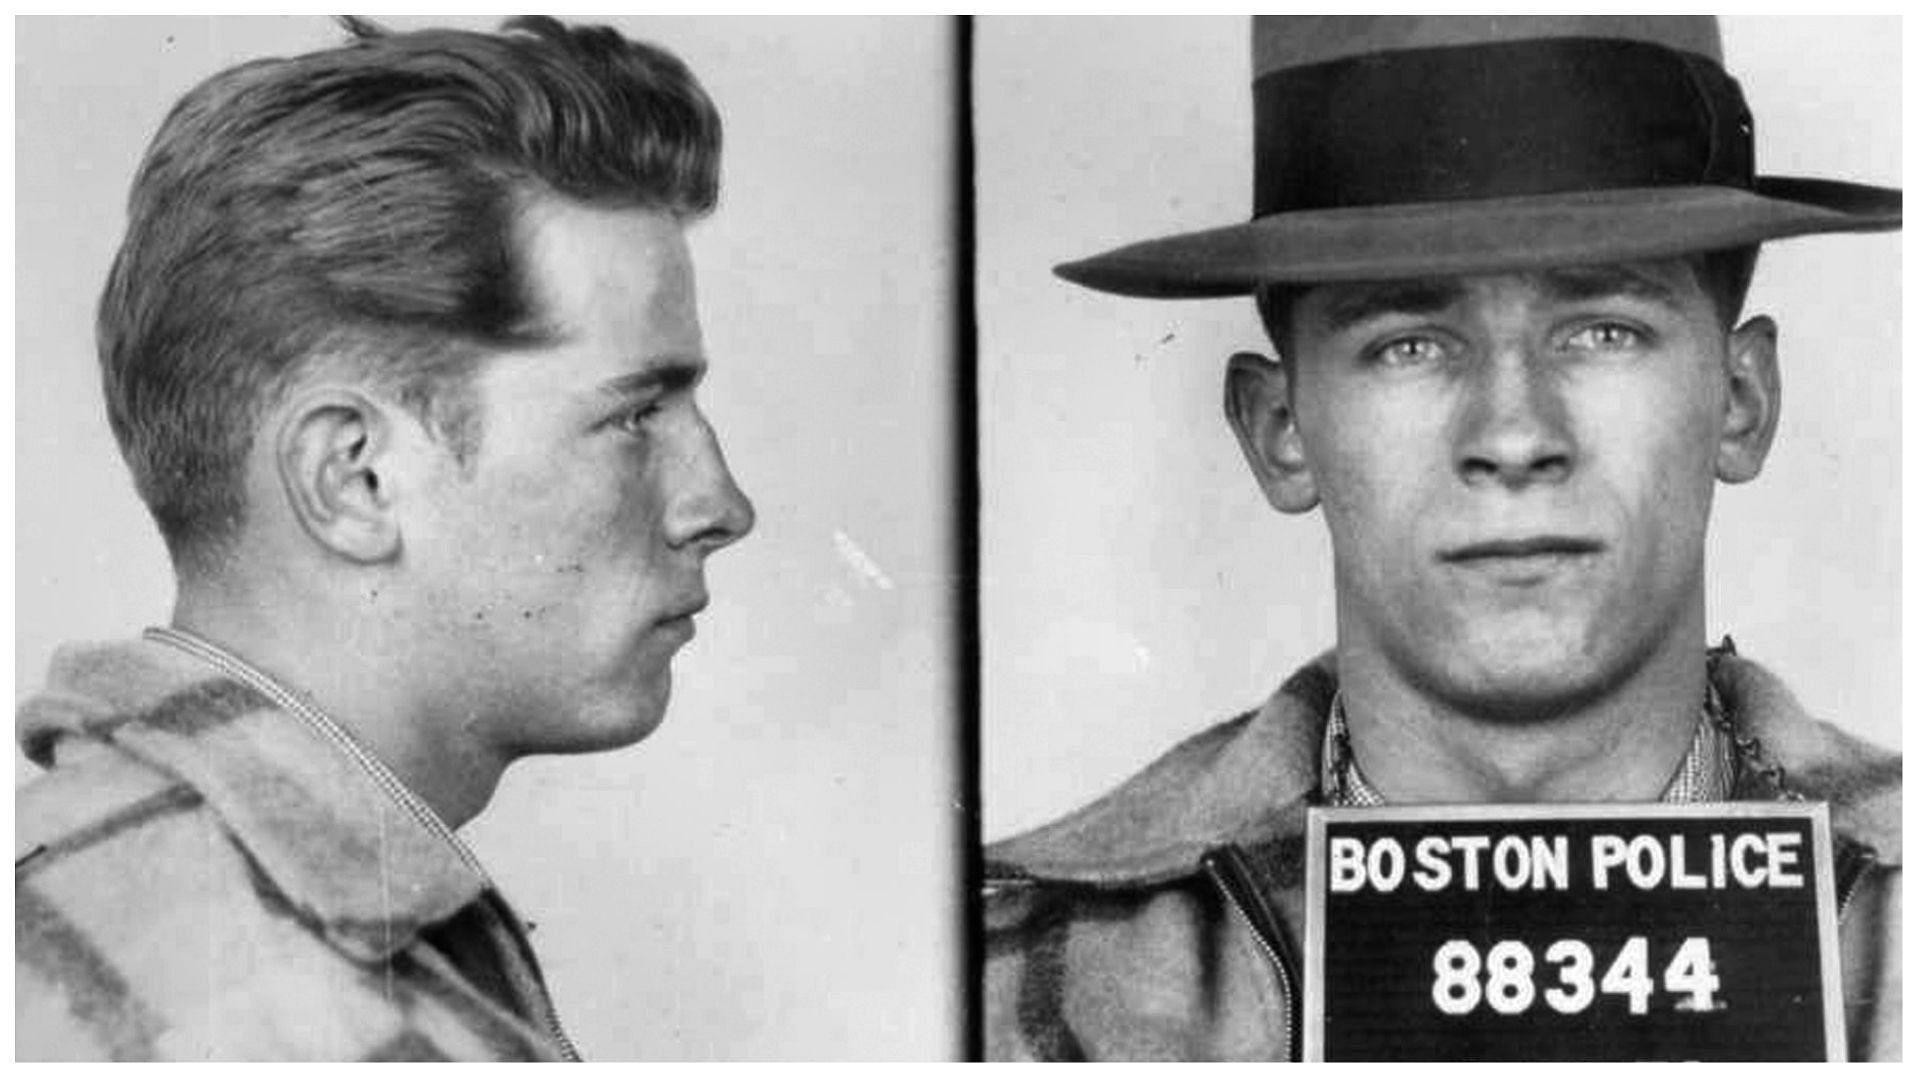 The mobster was convicted in 11 murders (Image via Boston Police Department)